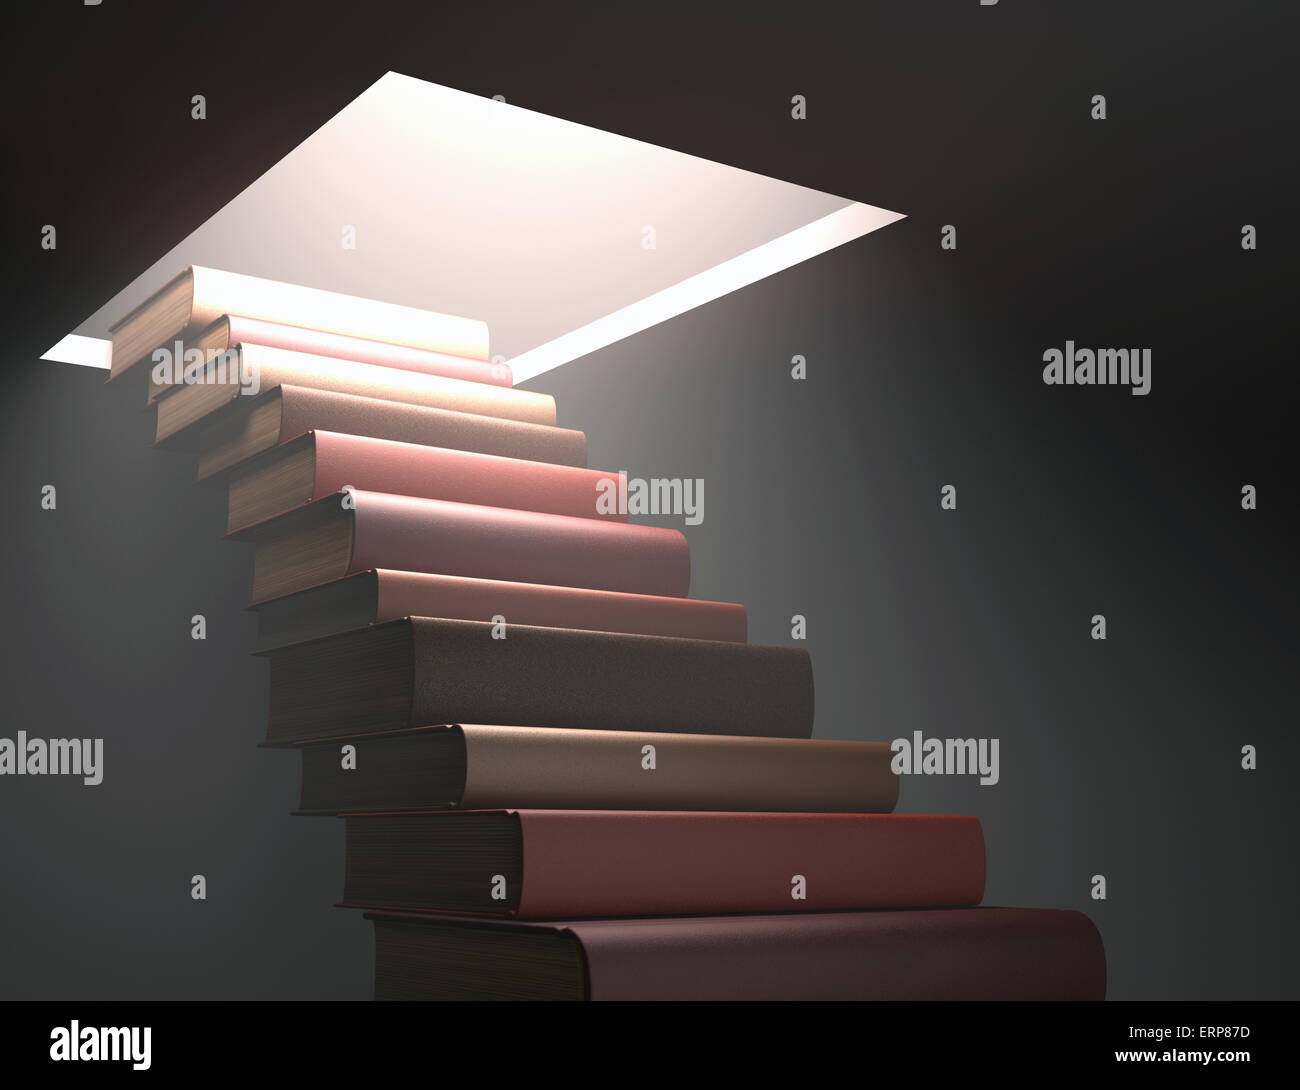 Books stacked ladder shaped on a concept of knowledge and growth. Stock Photo